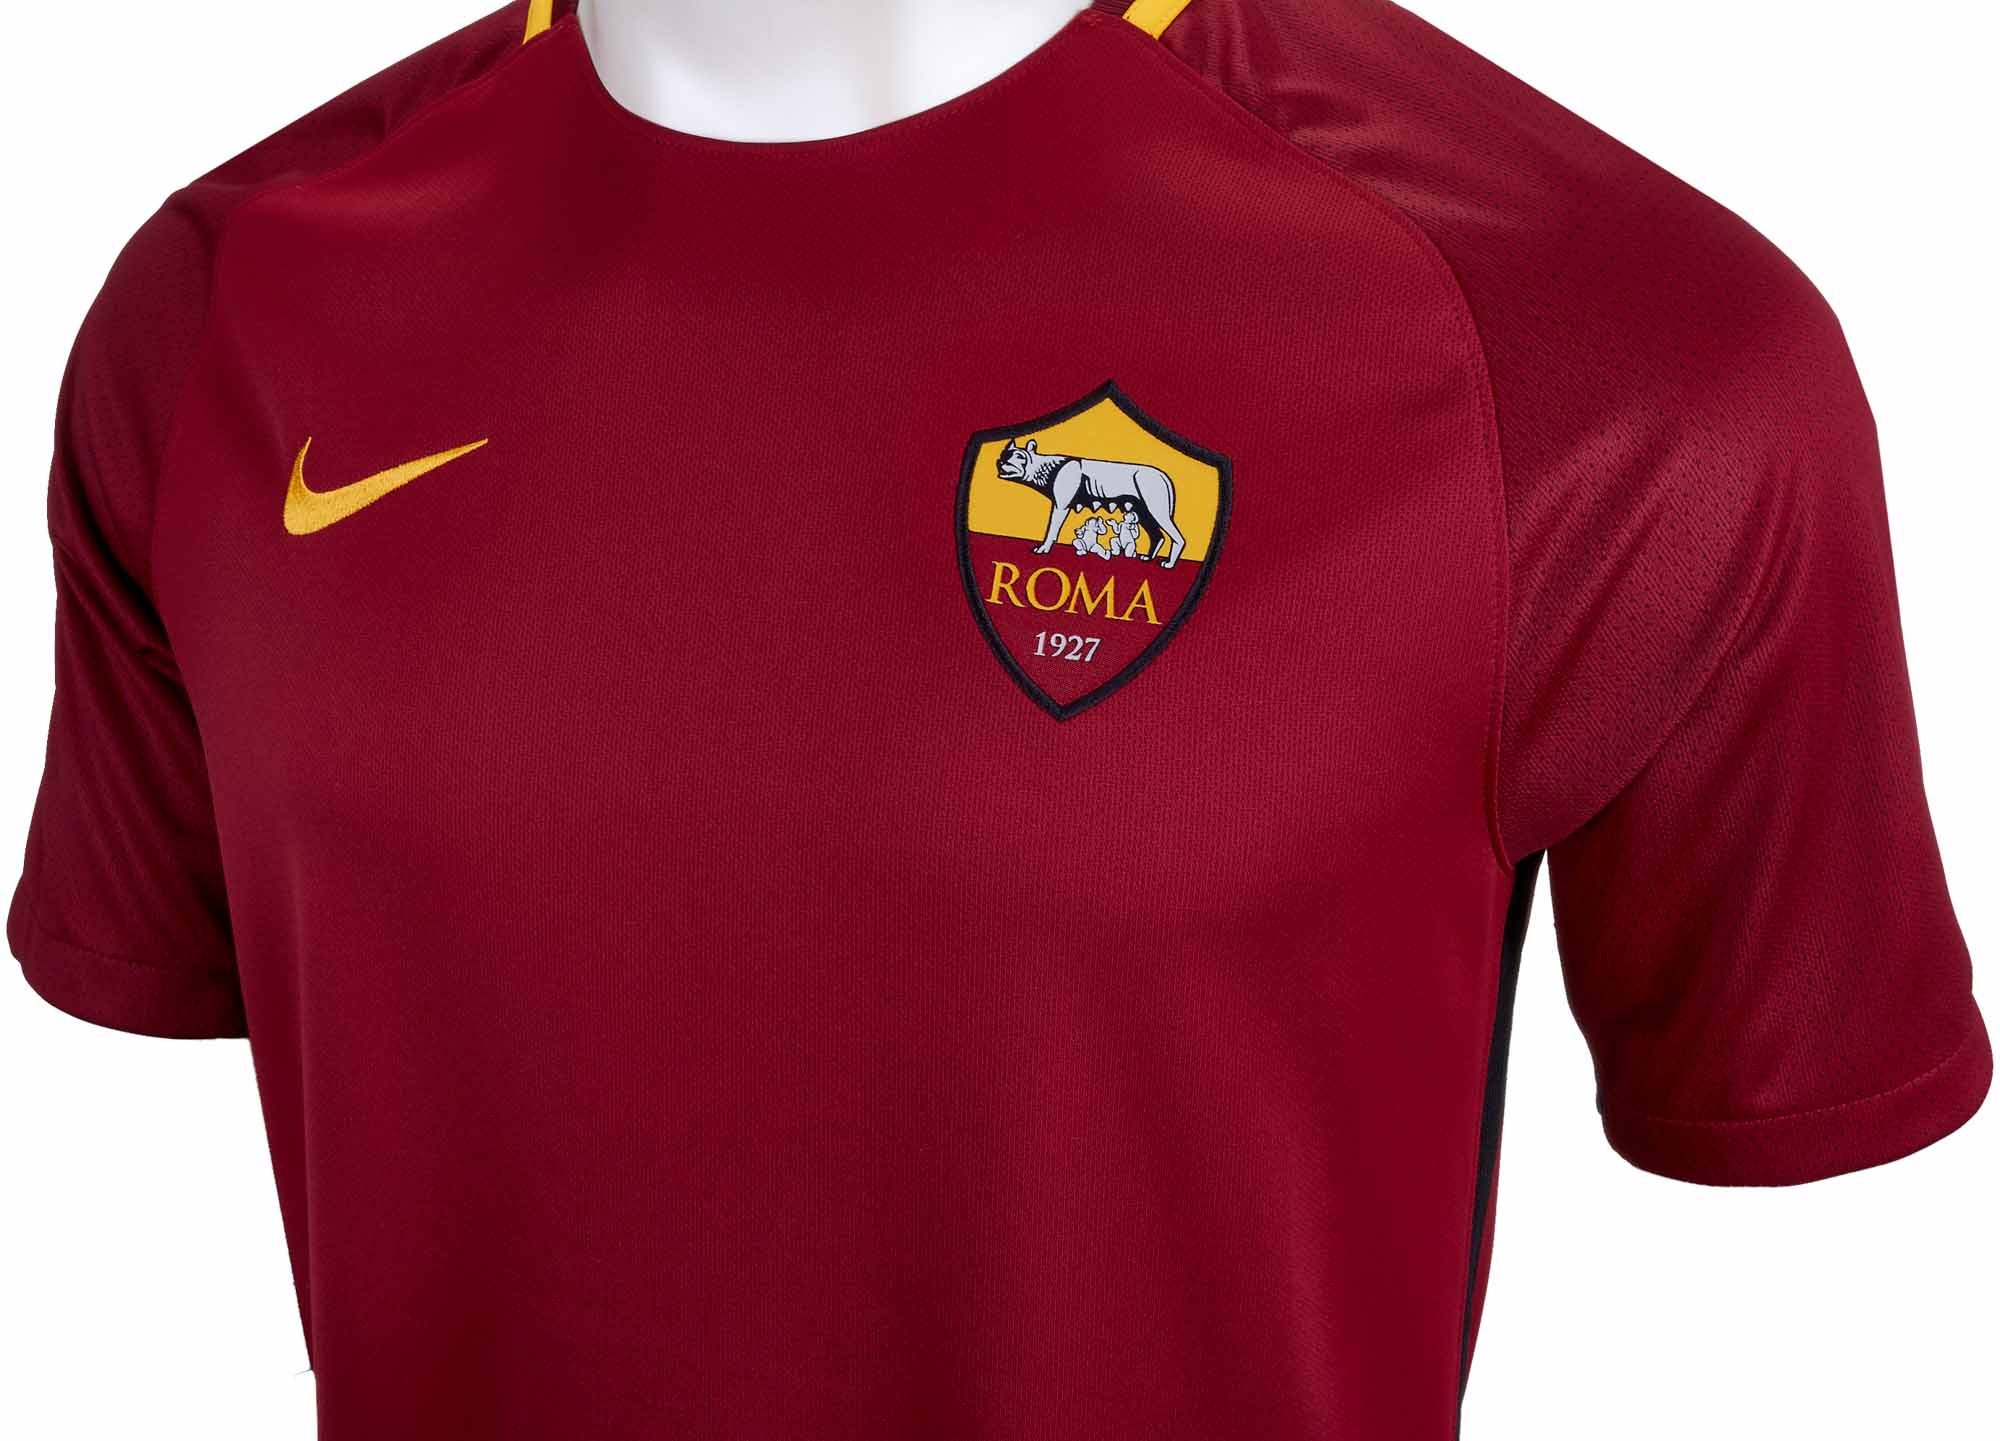 Bad factor going to decide Melt Nike AS Roma Home Jersey 2017-18 - Soccerpro.com